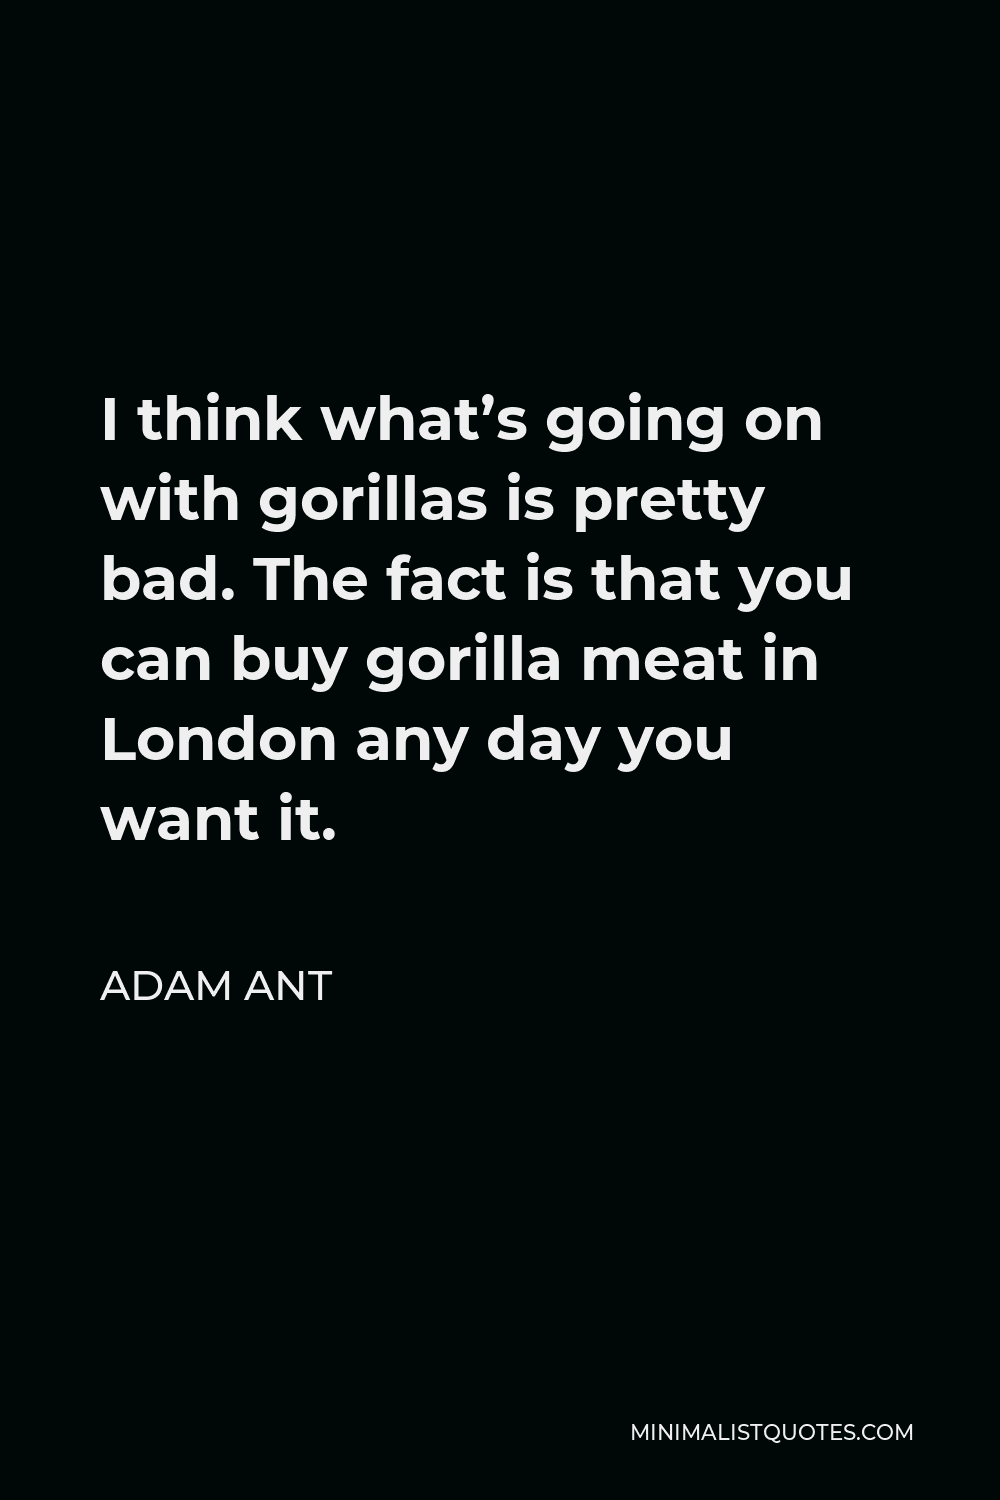 Adam Ant Quote - I think what’s going on with gorillas is pretty bad. The fact is that you can buy gorilla meat in London any day you want it.